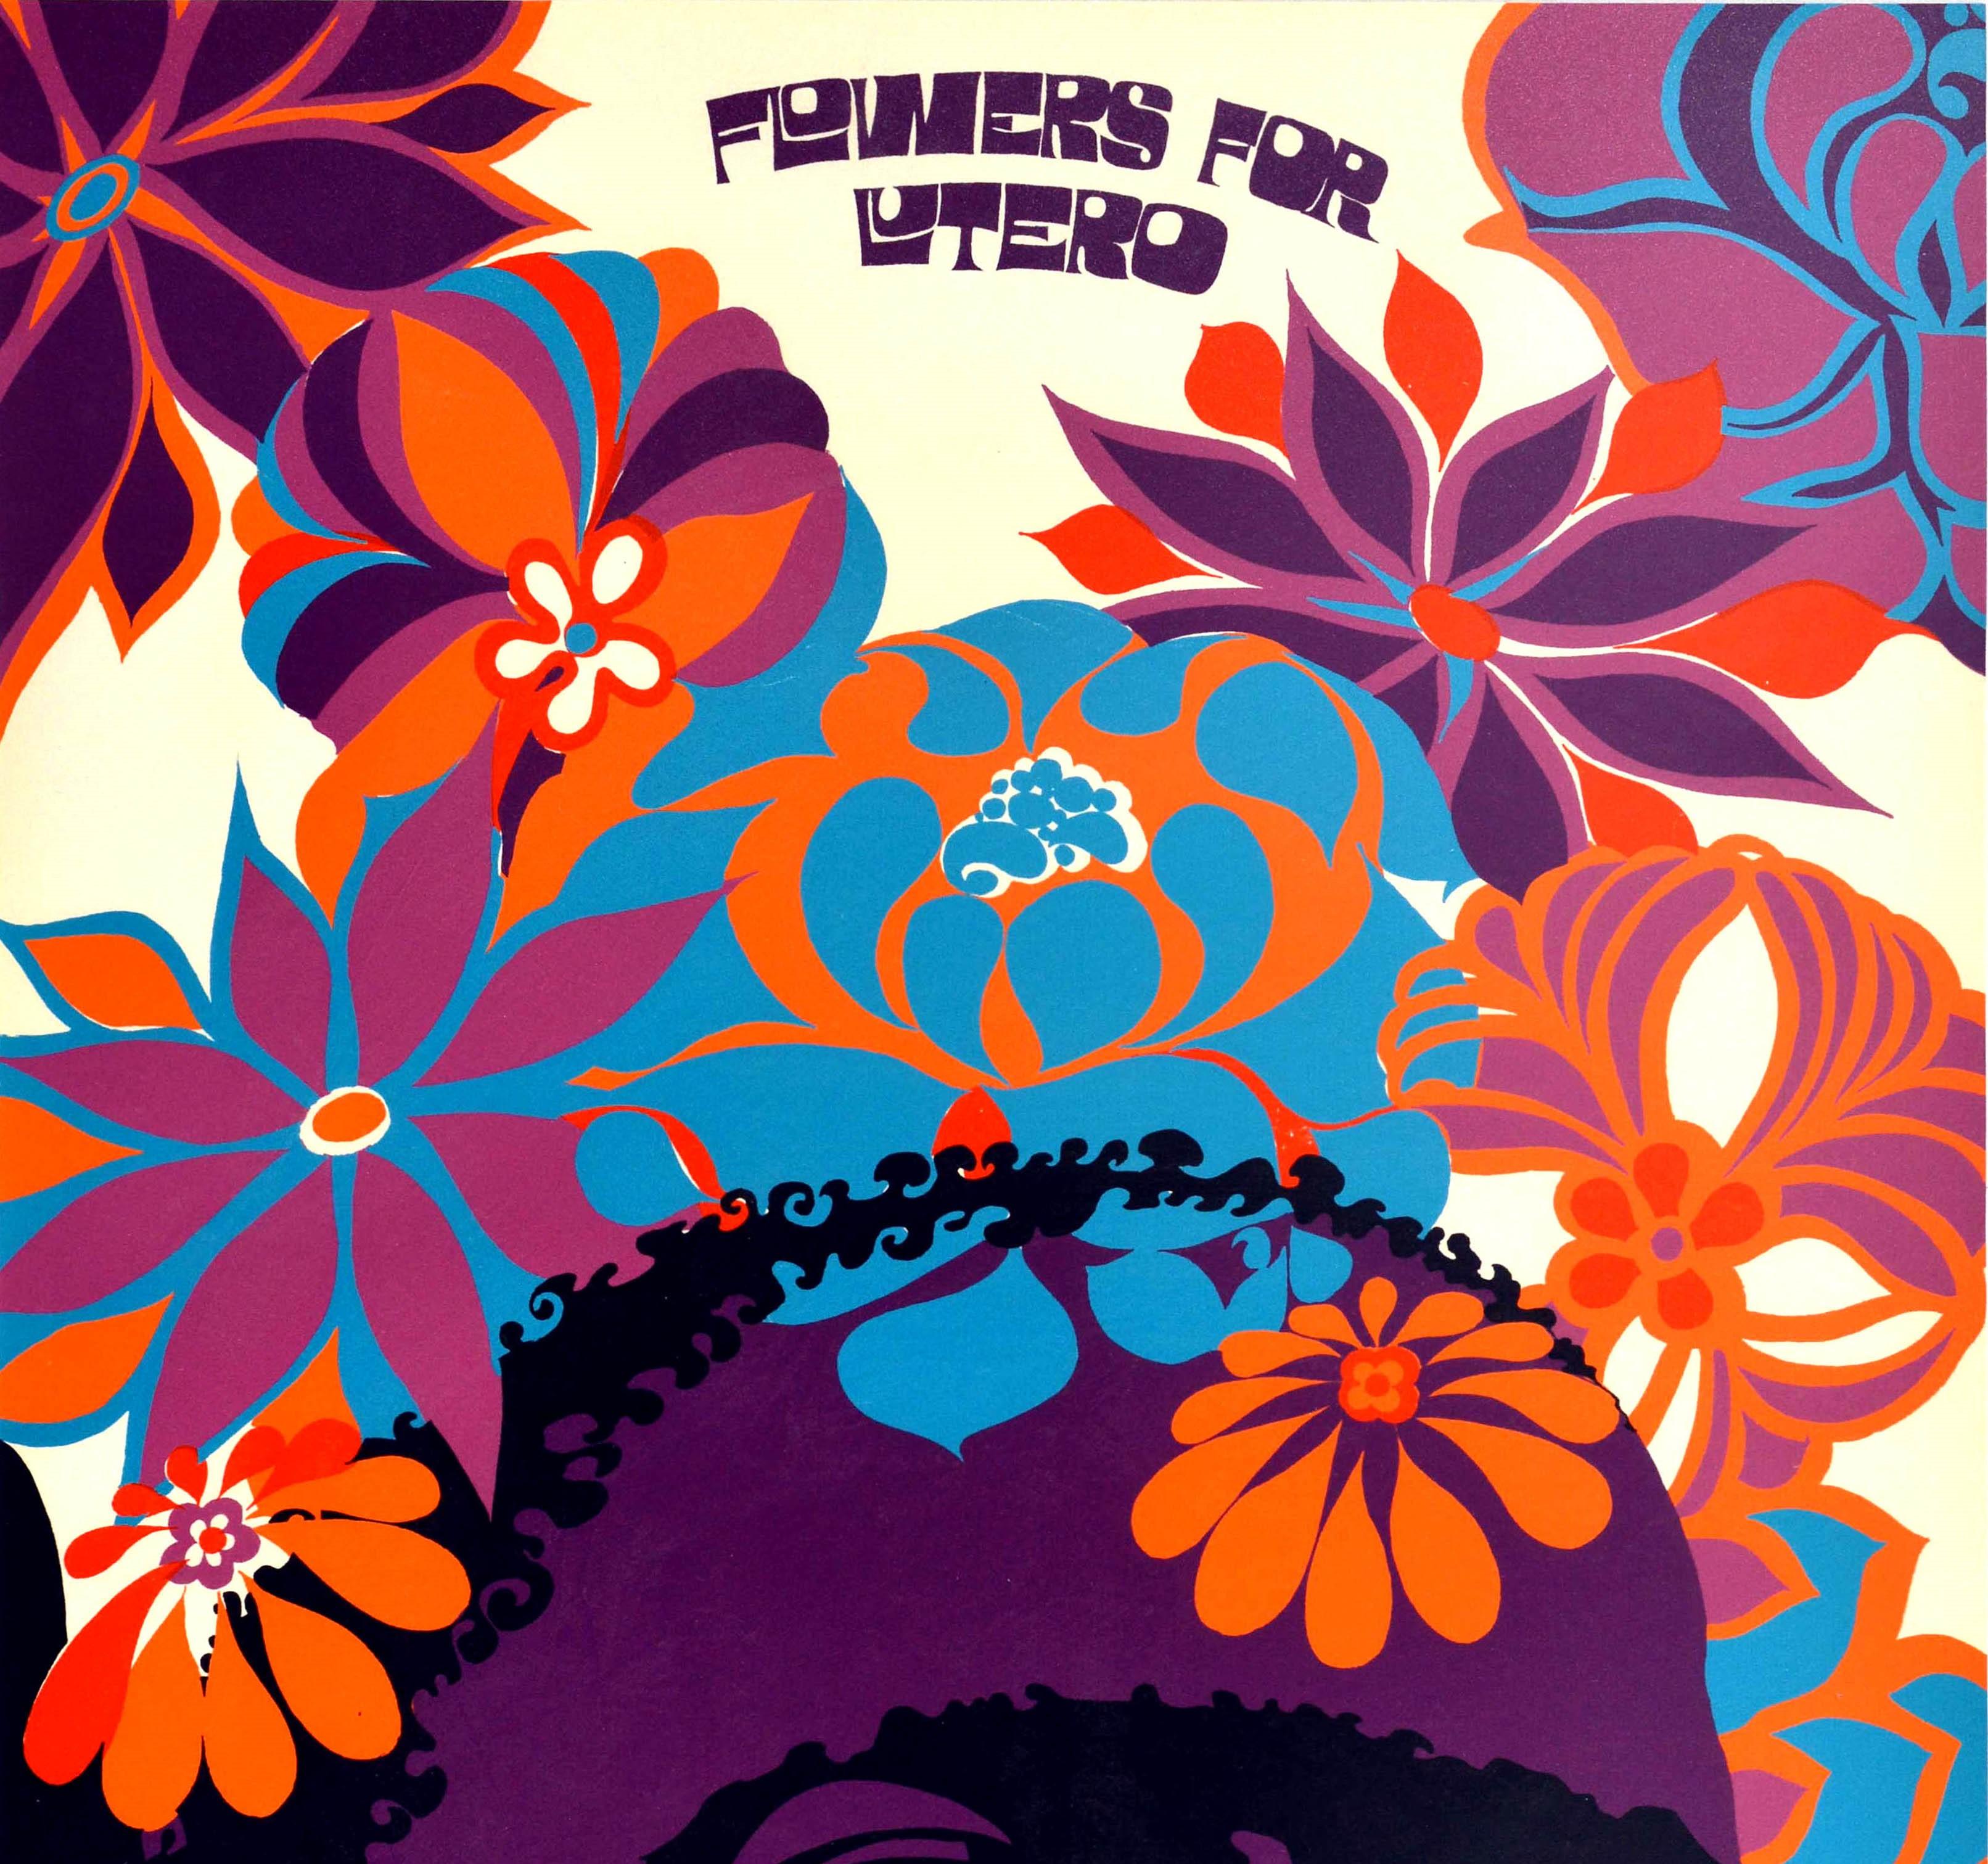 Original vintage memorial poster - Flowers For Lutero - featuring a colourful flower power pop art style image to commemorate the African American Baptist minister and civil rights activist Martin Luther King Jr. (1929-1968) depicting King